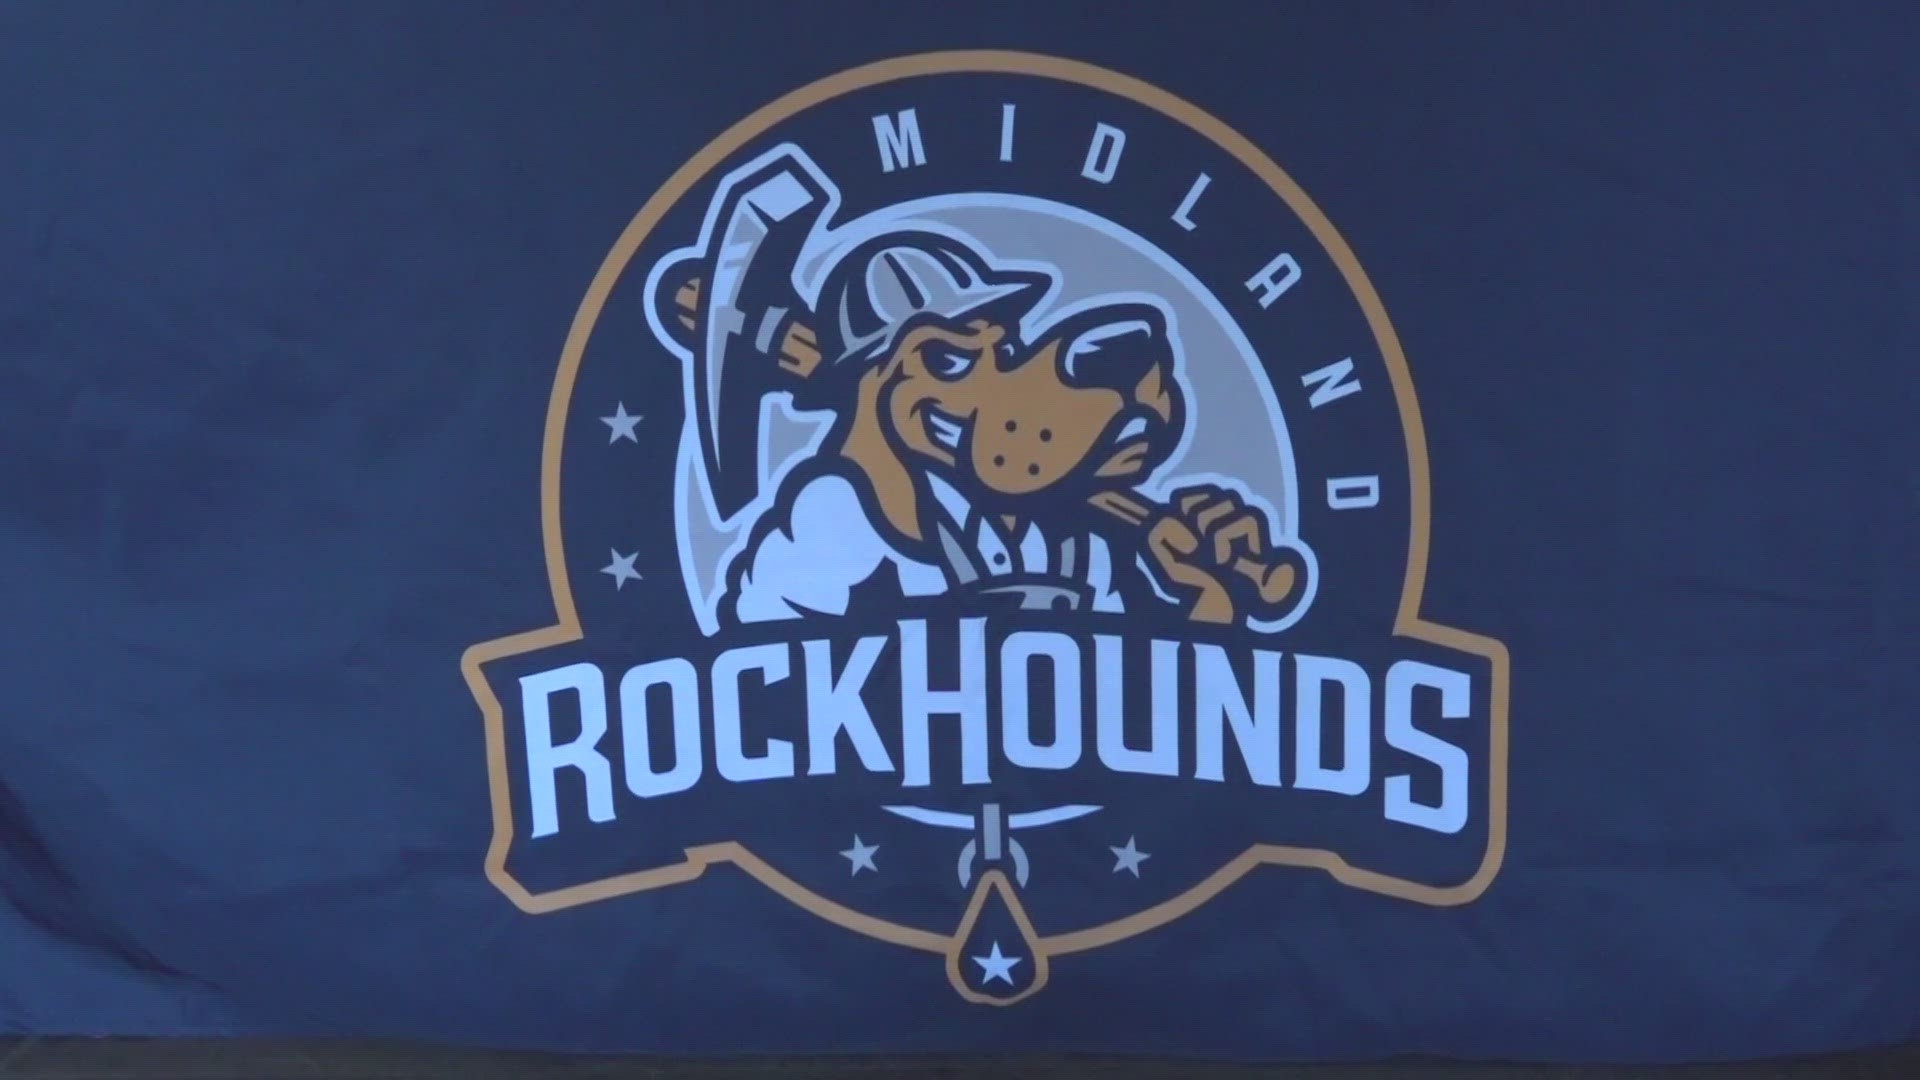 The Rockhounds will be accepting donations Friday from 8:00 a.m. to 5:00 p.m. and Saturday through Sunday from 9:00 a.m. to 1:00 p.m.